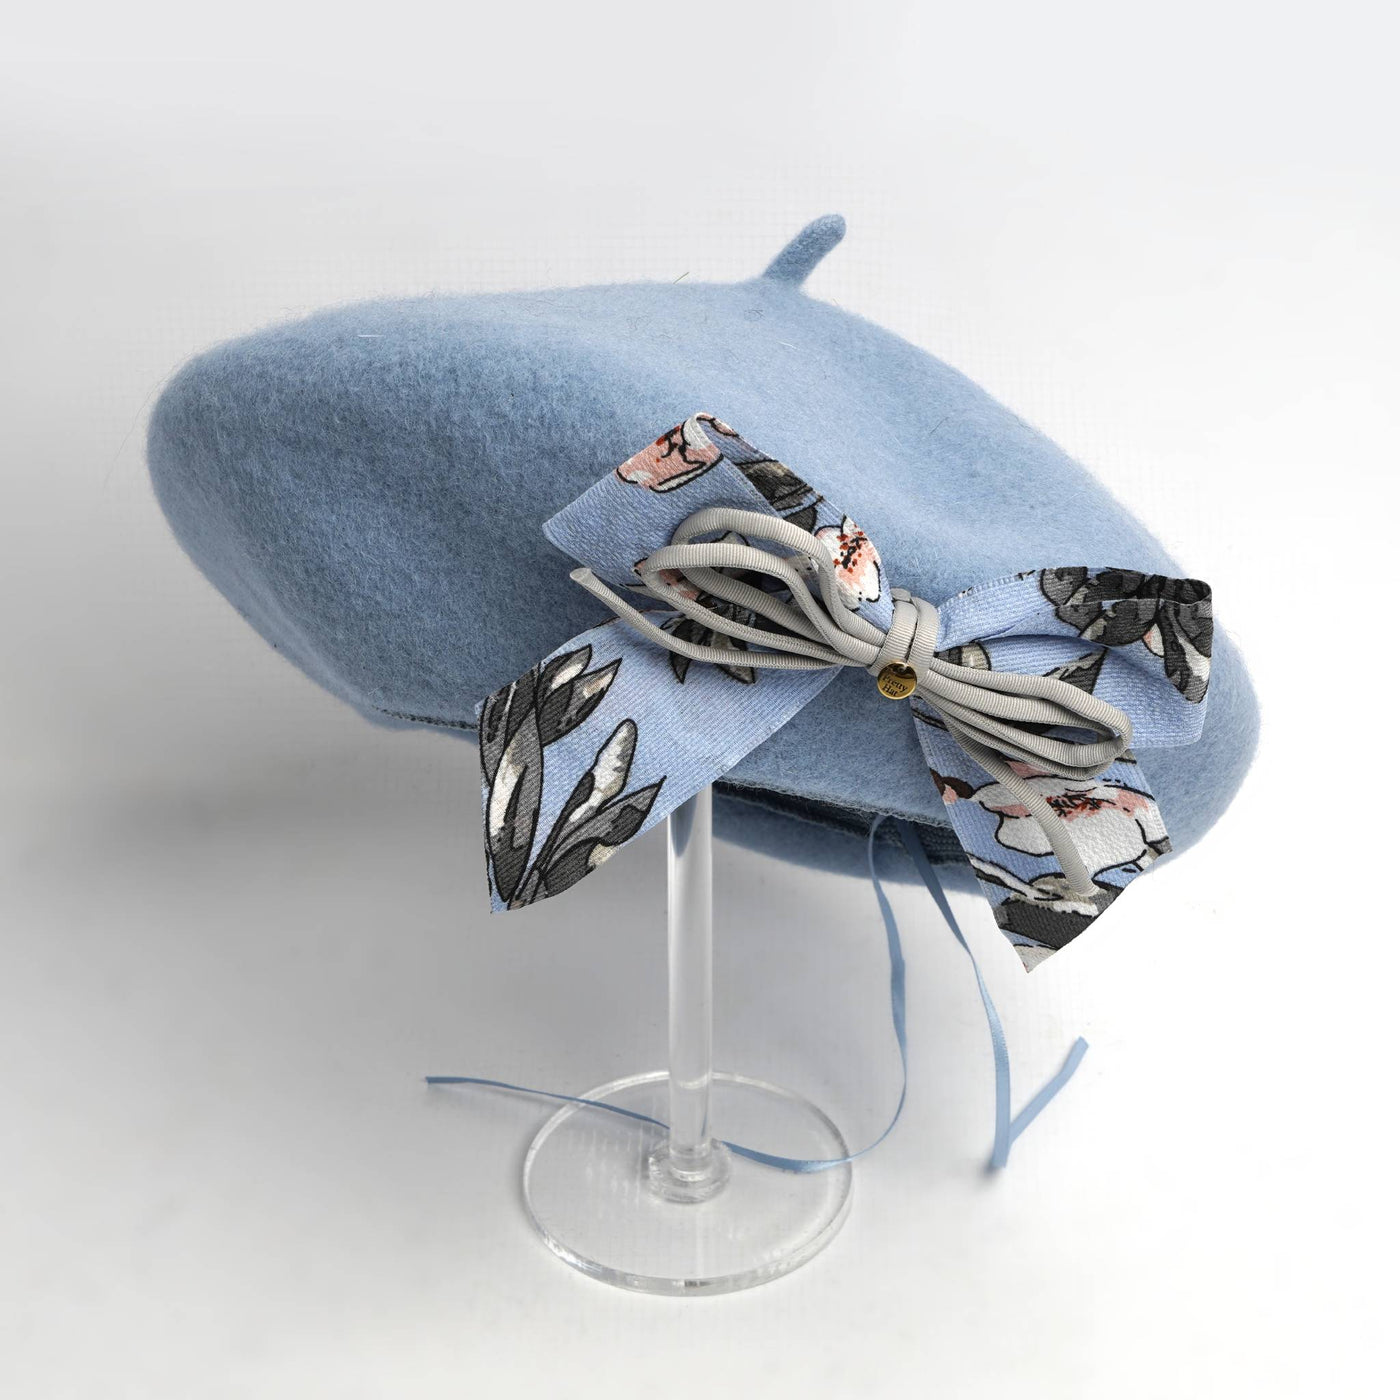 Polly Bow Back Beret - Periwinkle Blue - The Pretty Hat